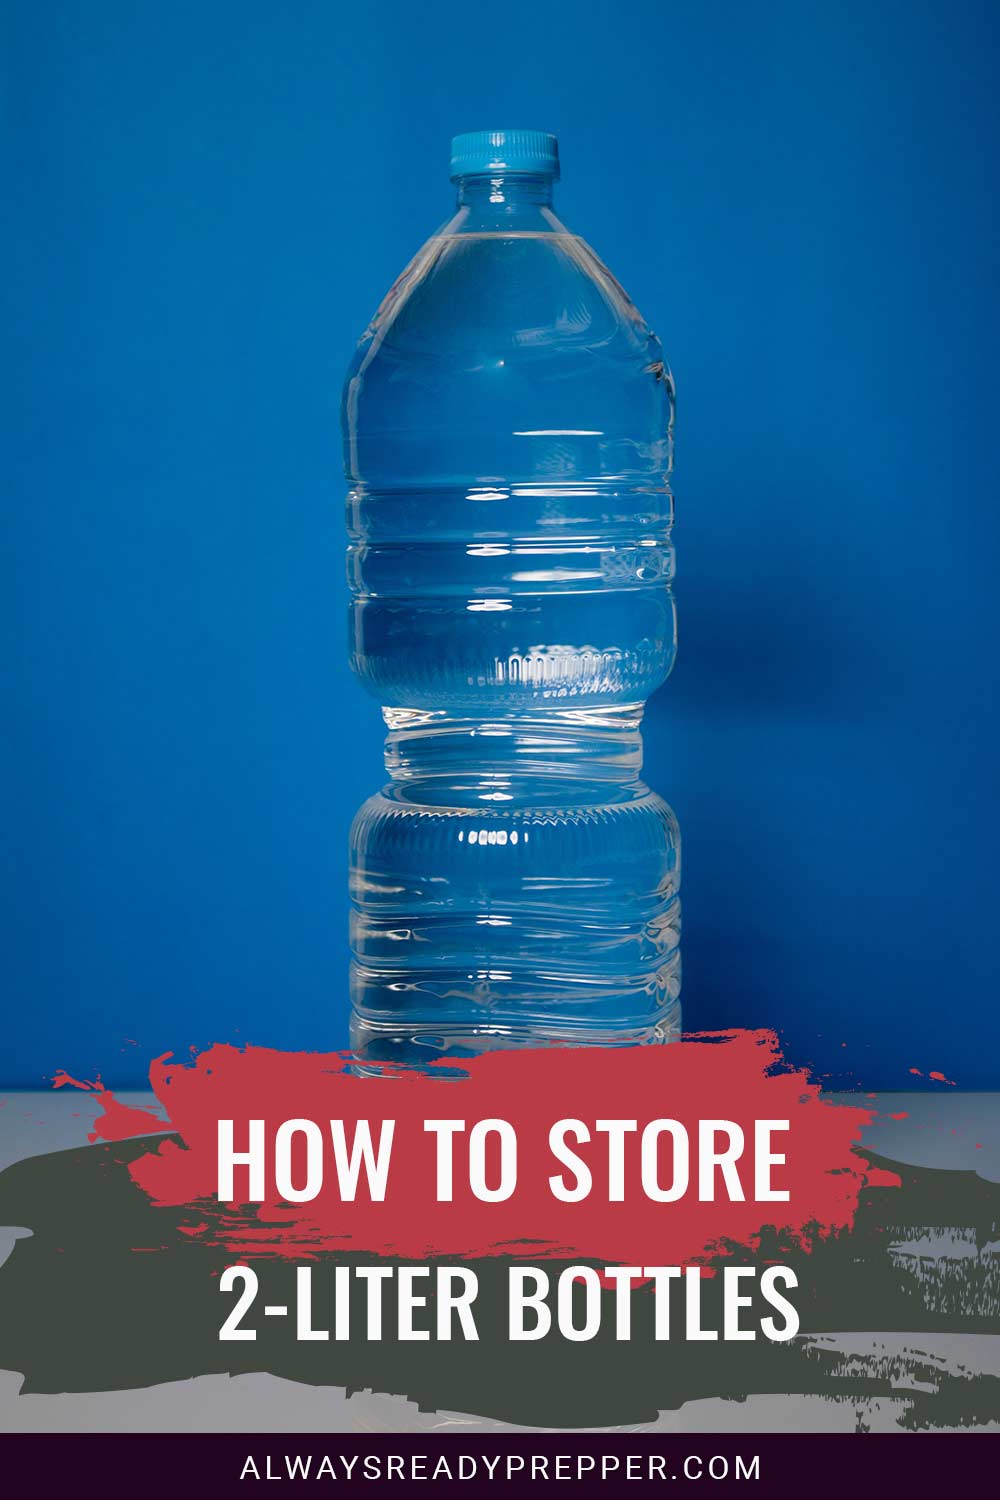 A plastic water bottle in front of a blue wall - How To Store 2-Liter Bottles